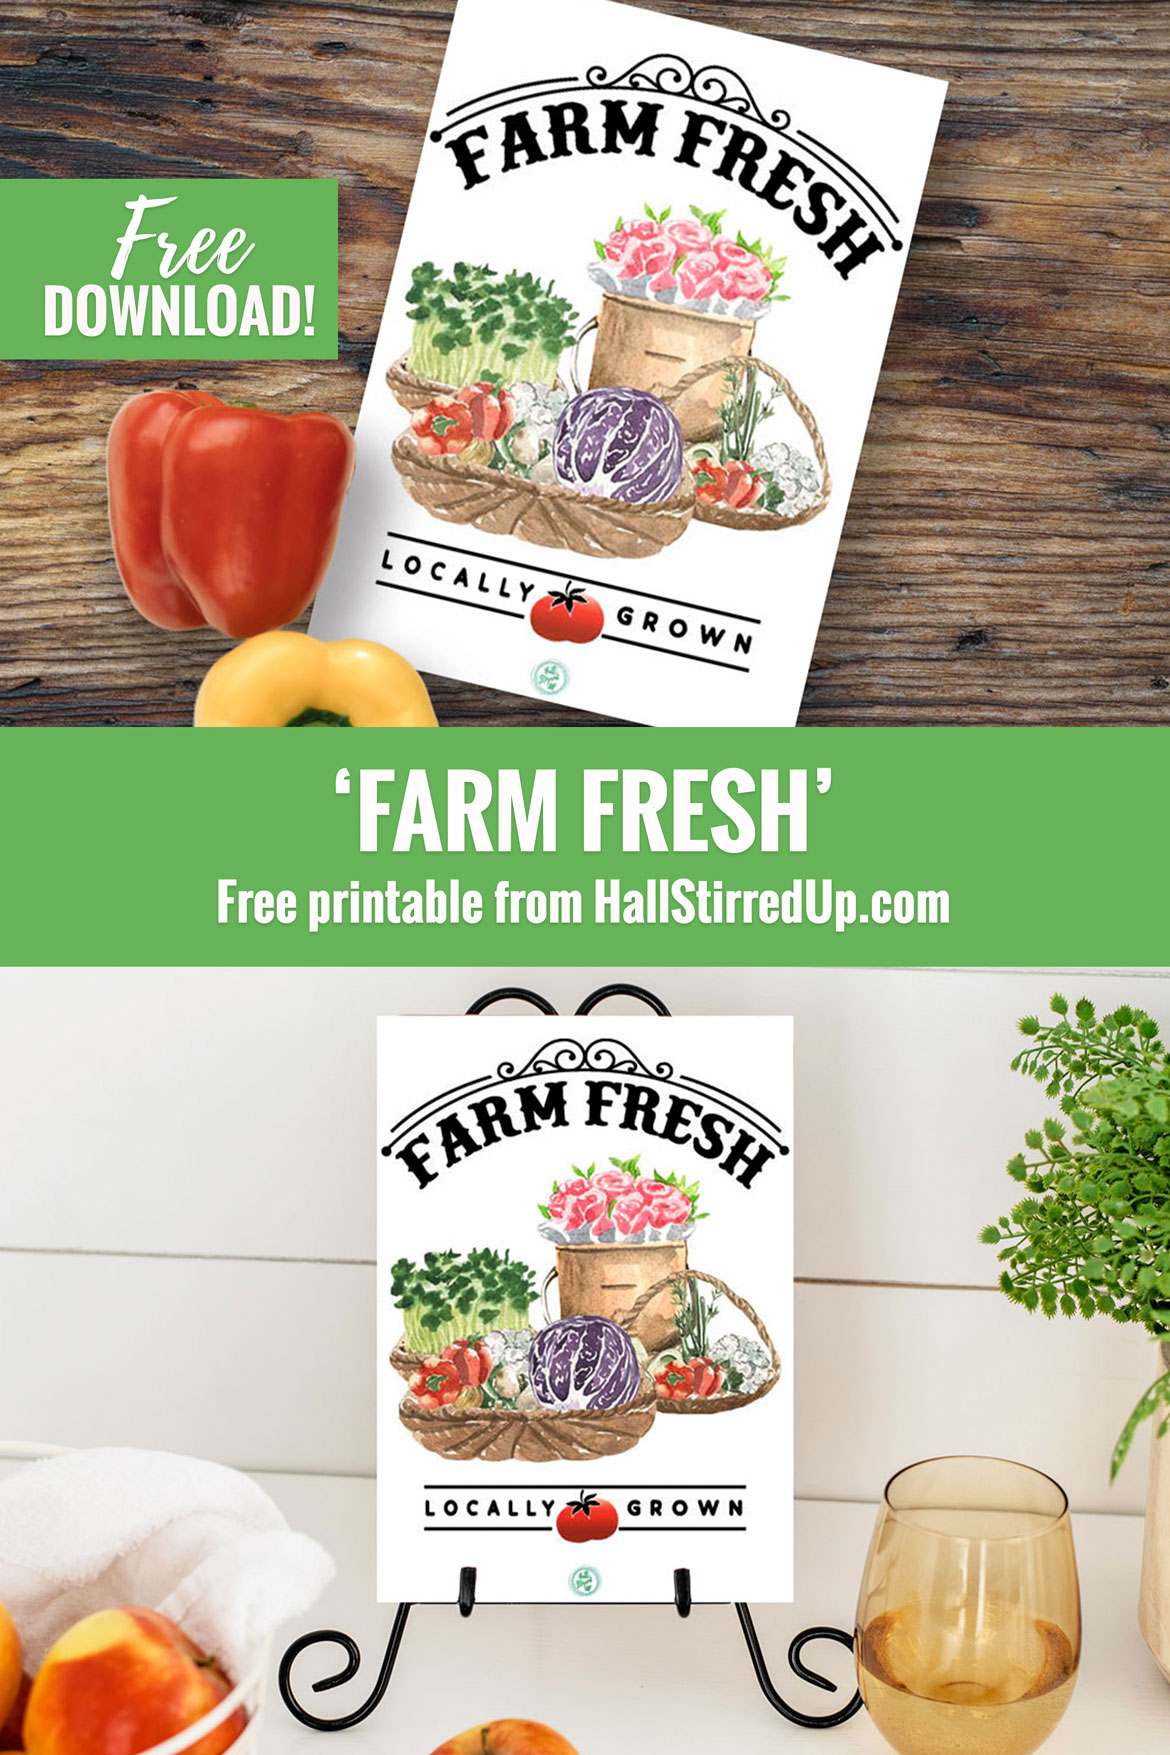 3 simple ways to find farm fresh produce - includes printable